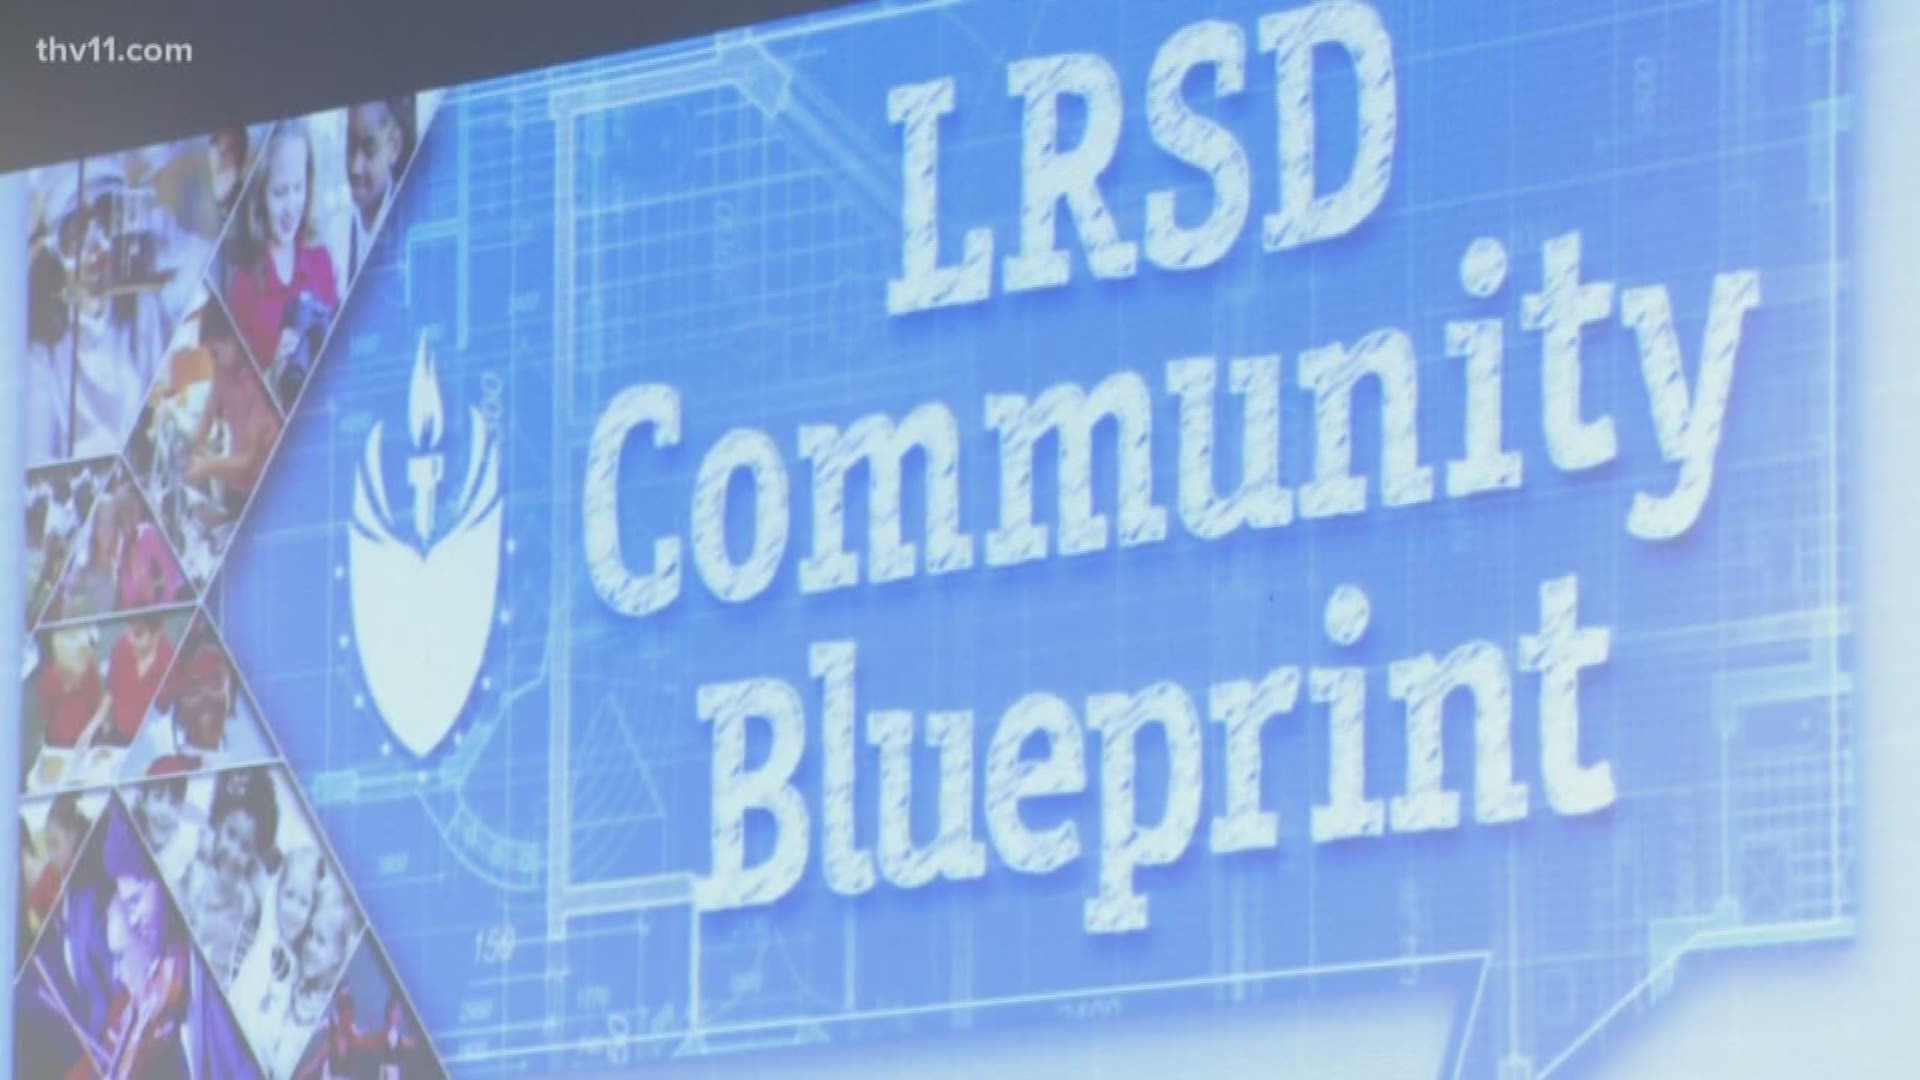 LRSD announced this week which schools are headed for changes in the next five years, and tonight, superintendent Michael Poore opened up those plans for comments from parents.